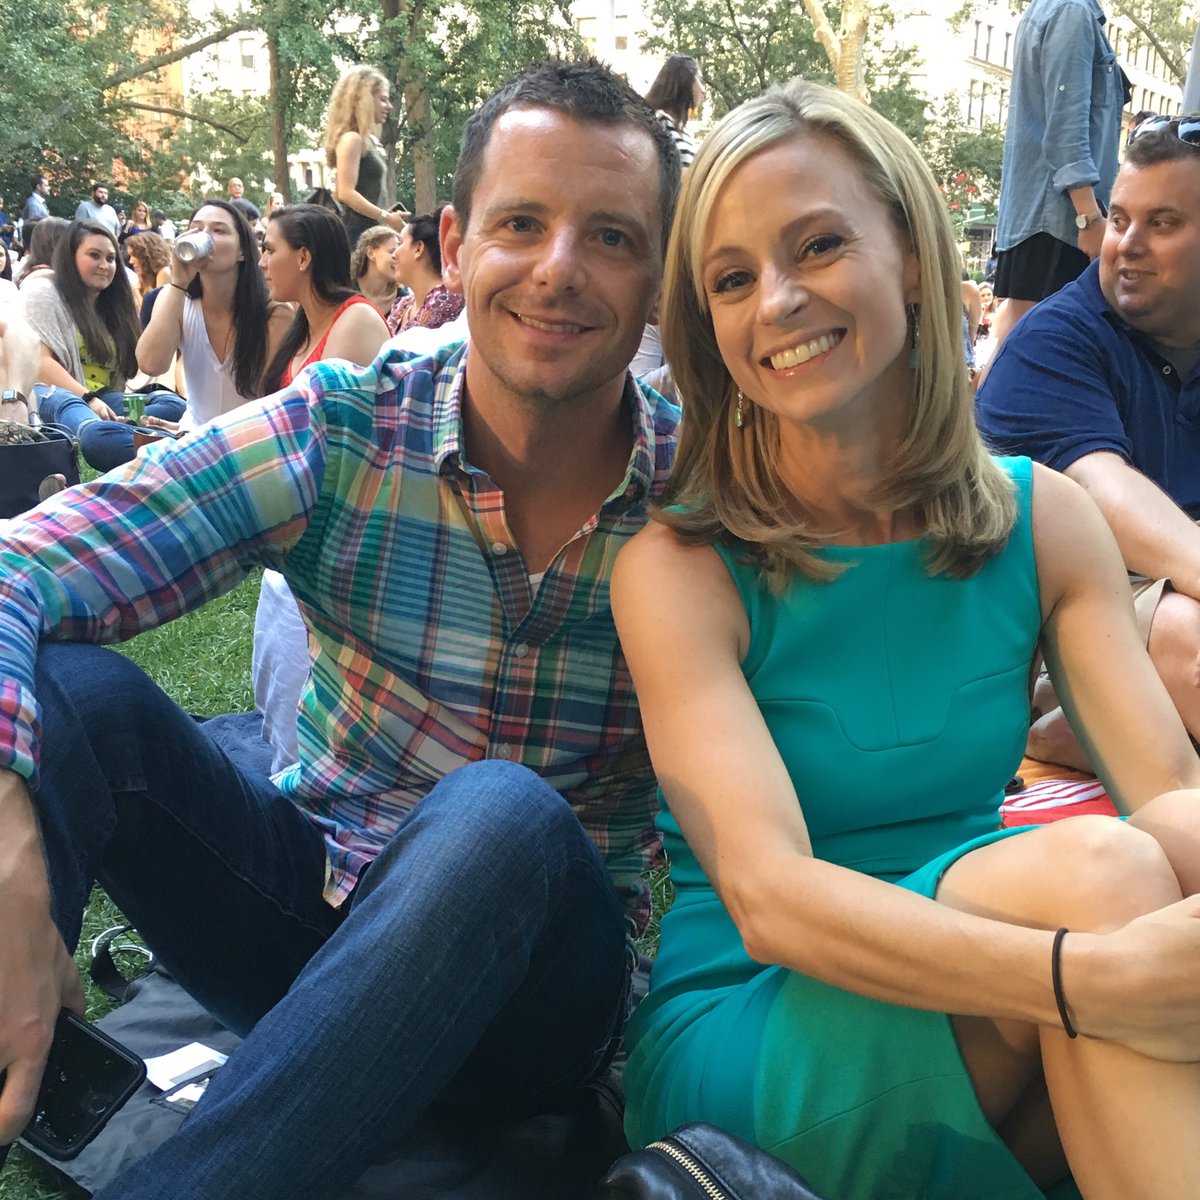 Courtney Reagan on Twitter: "Just a little @jakeowen pop-up concert in NYC  with my cousin in from St. Louis for work!… "